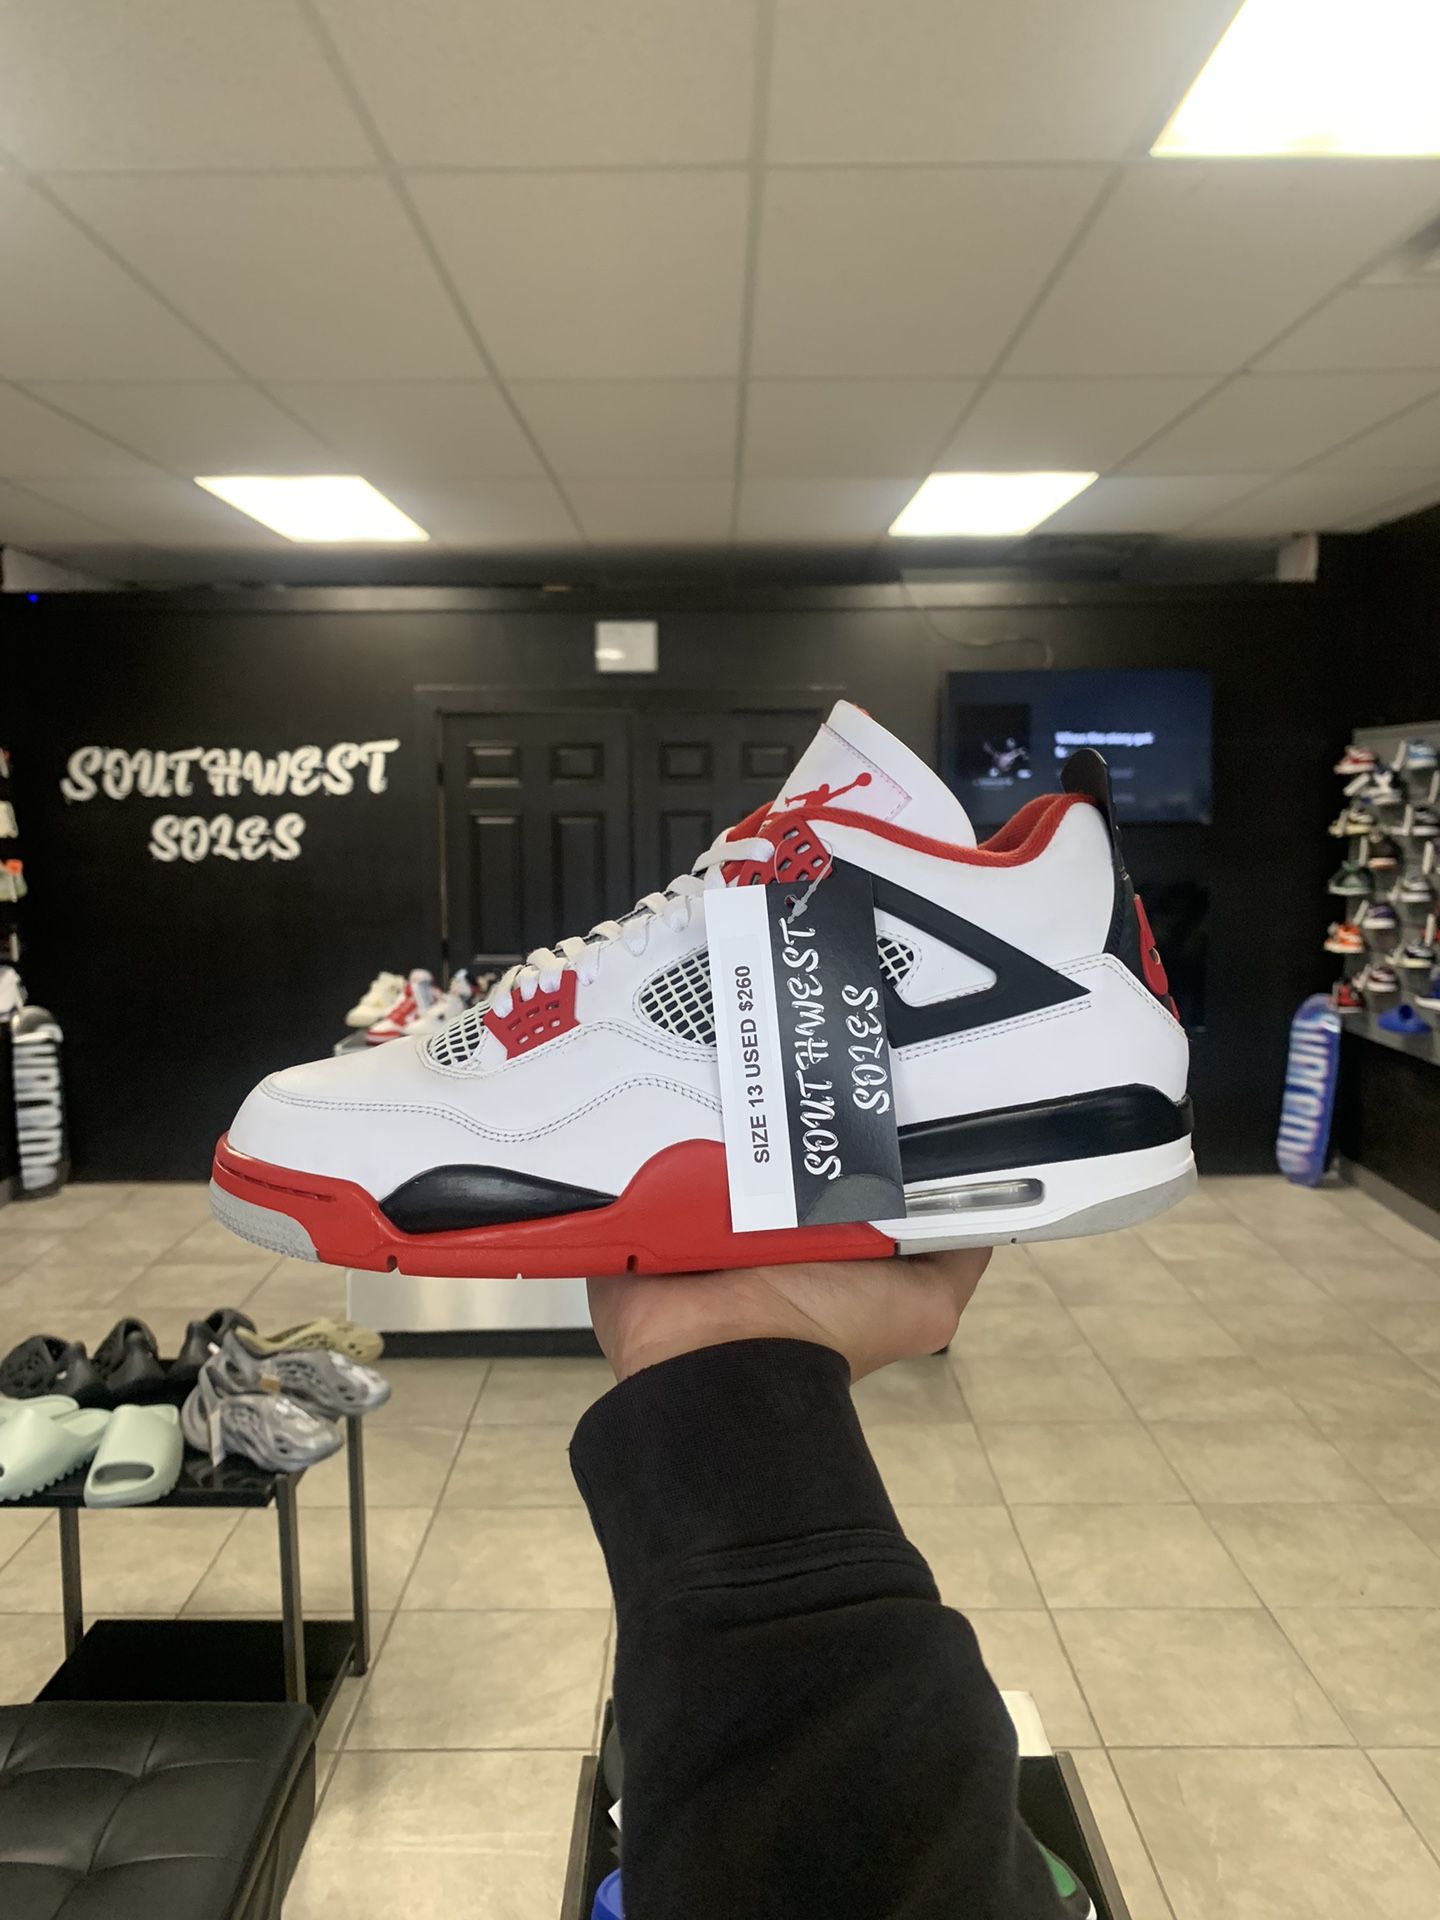 Jordan 4 Fire Red Size 13 Available In Store!